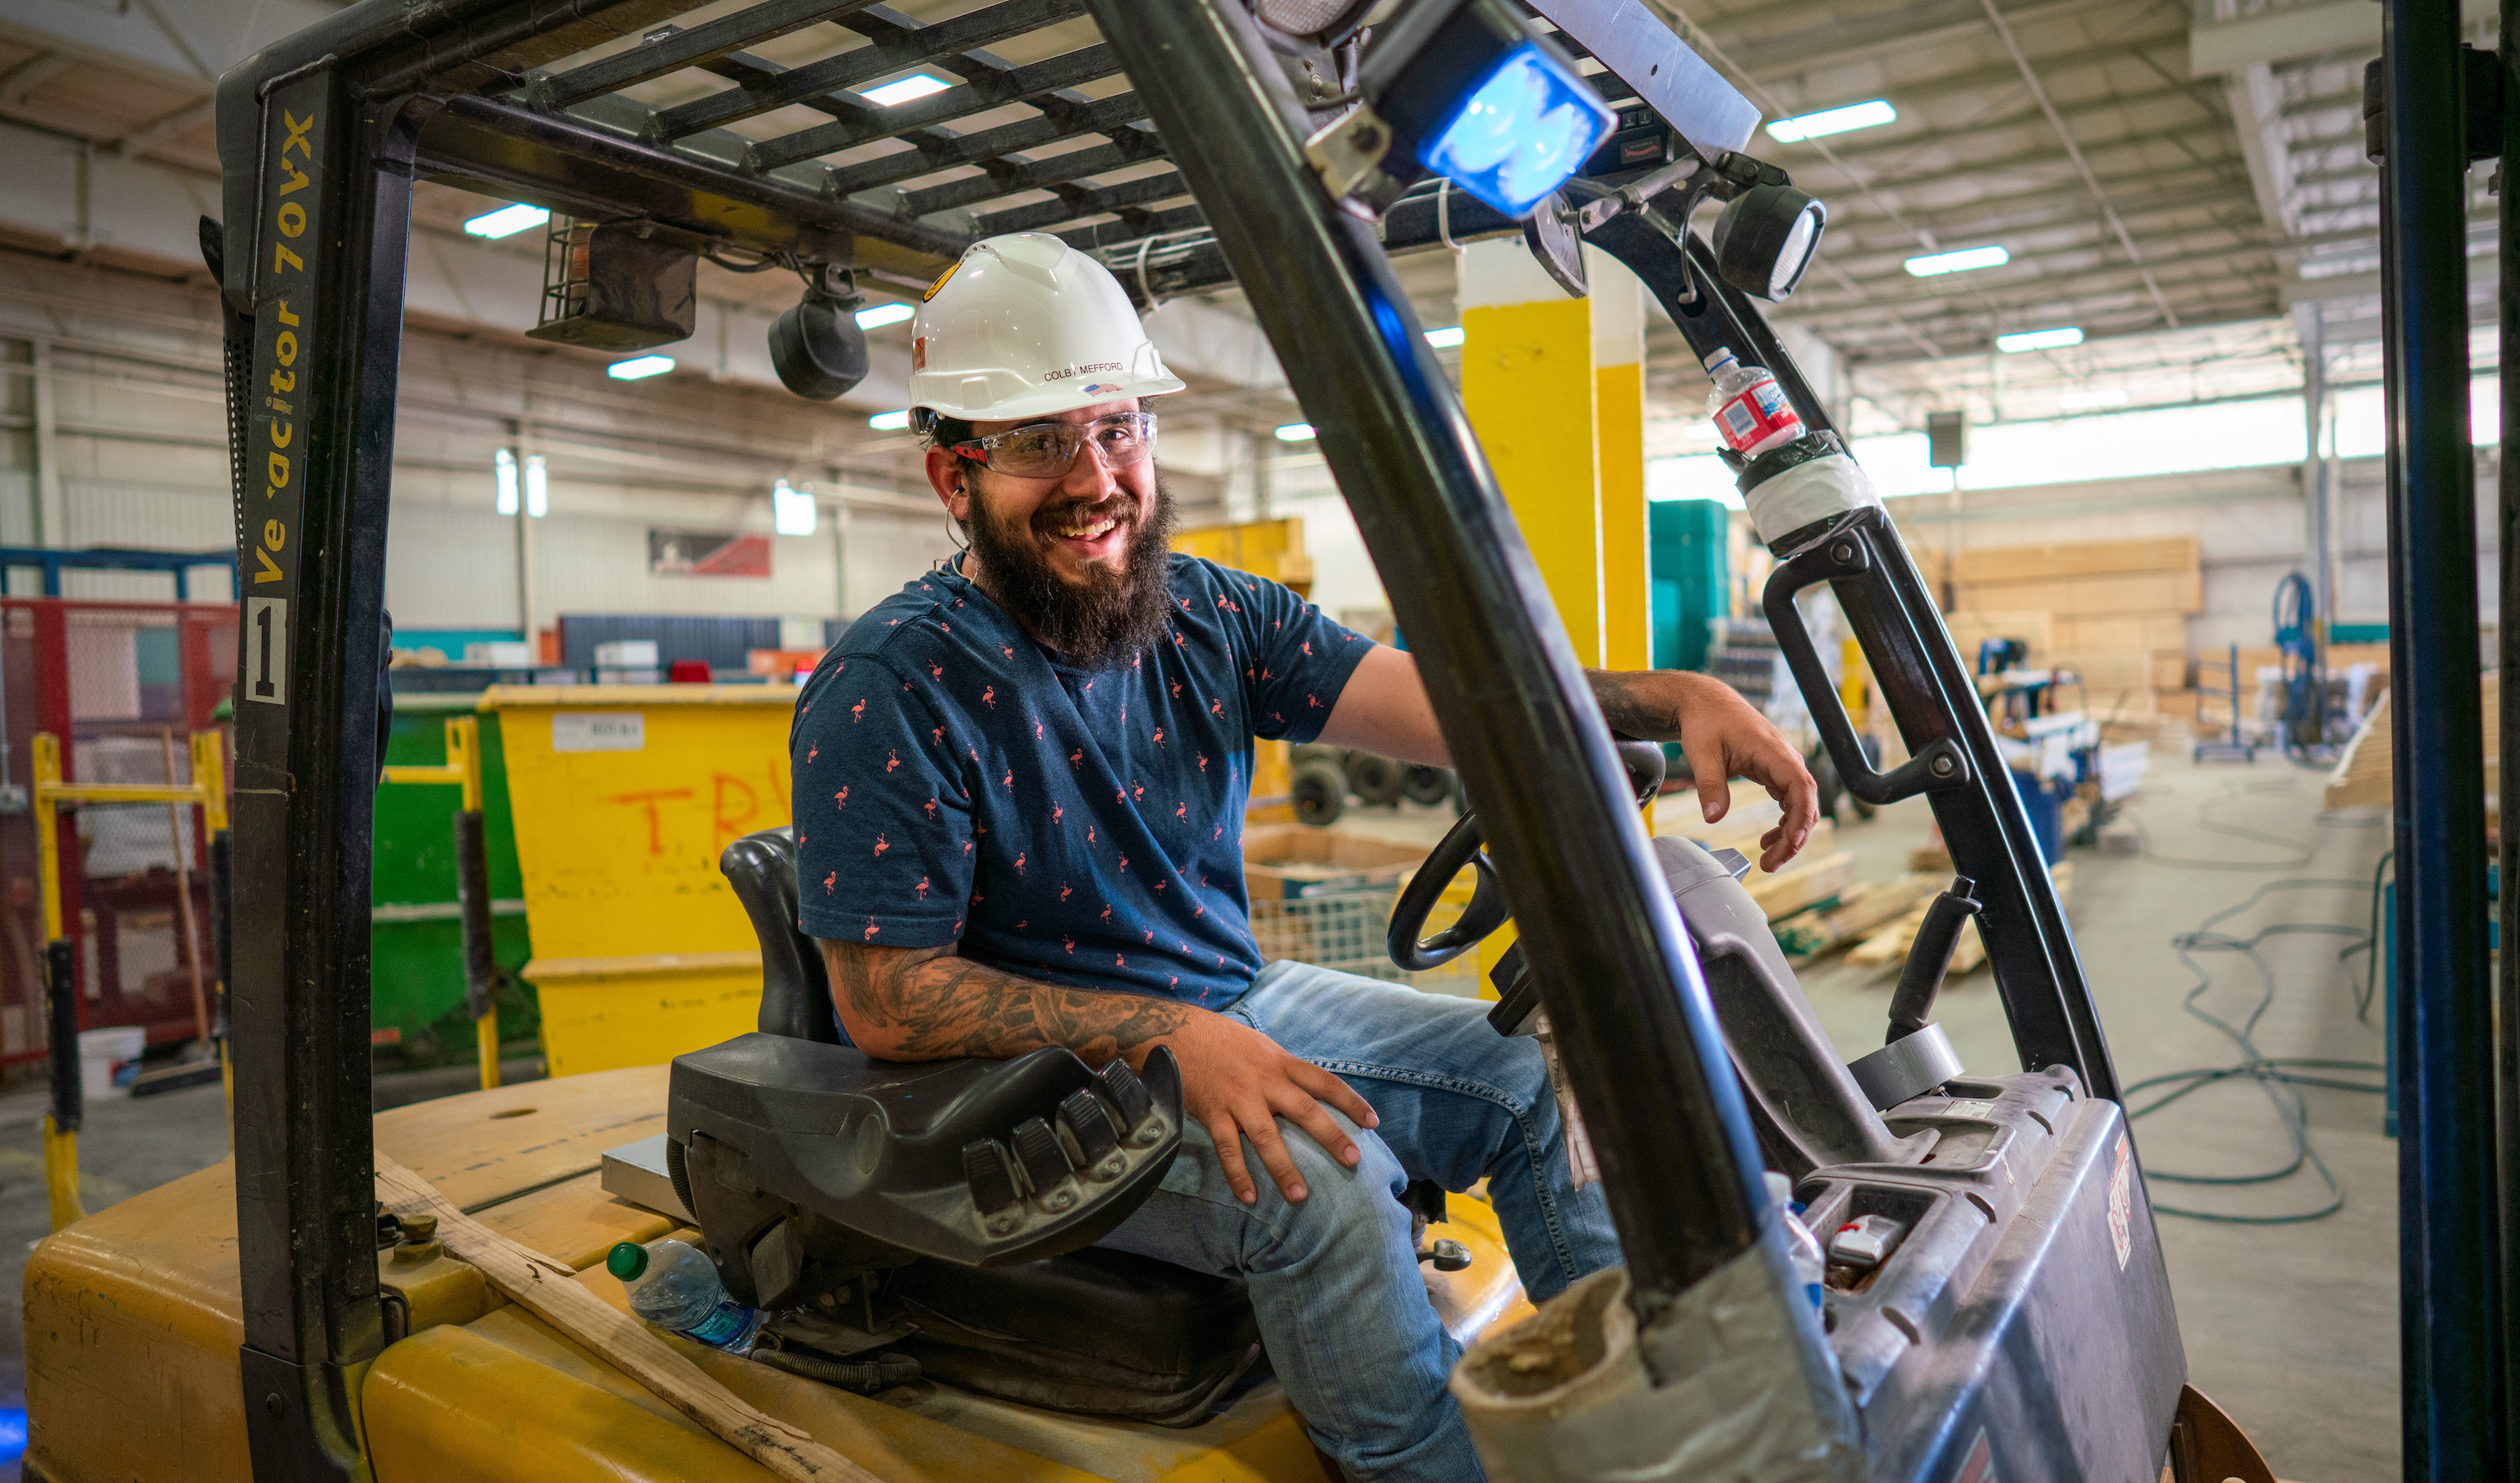 Employee smiling on his forklift machine